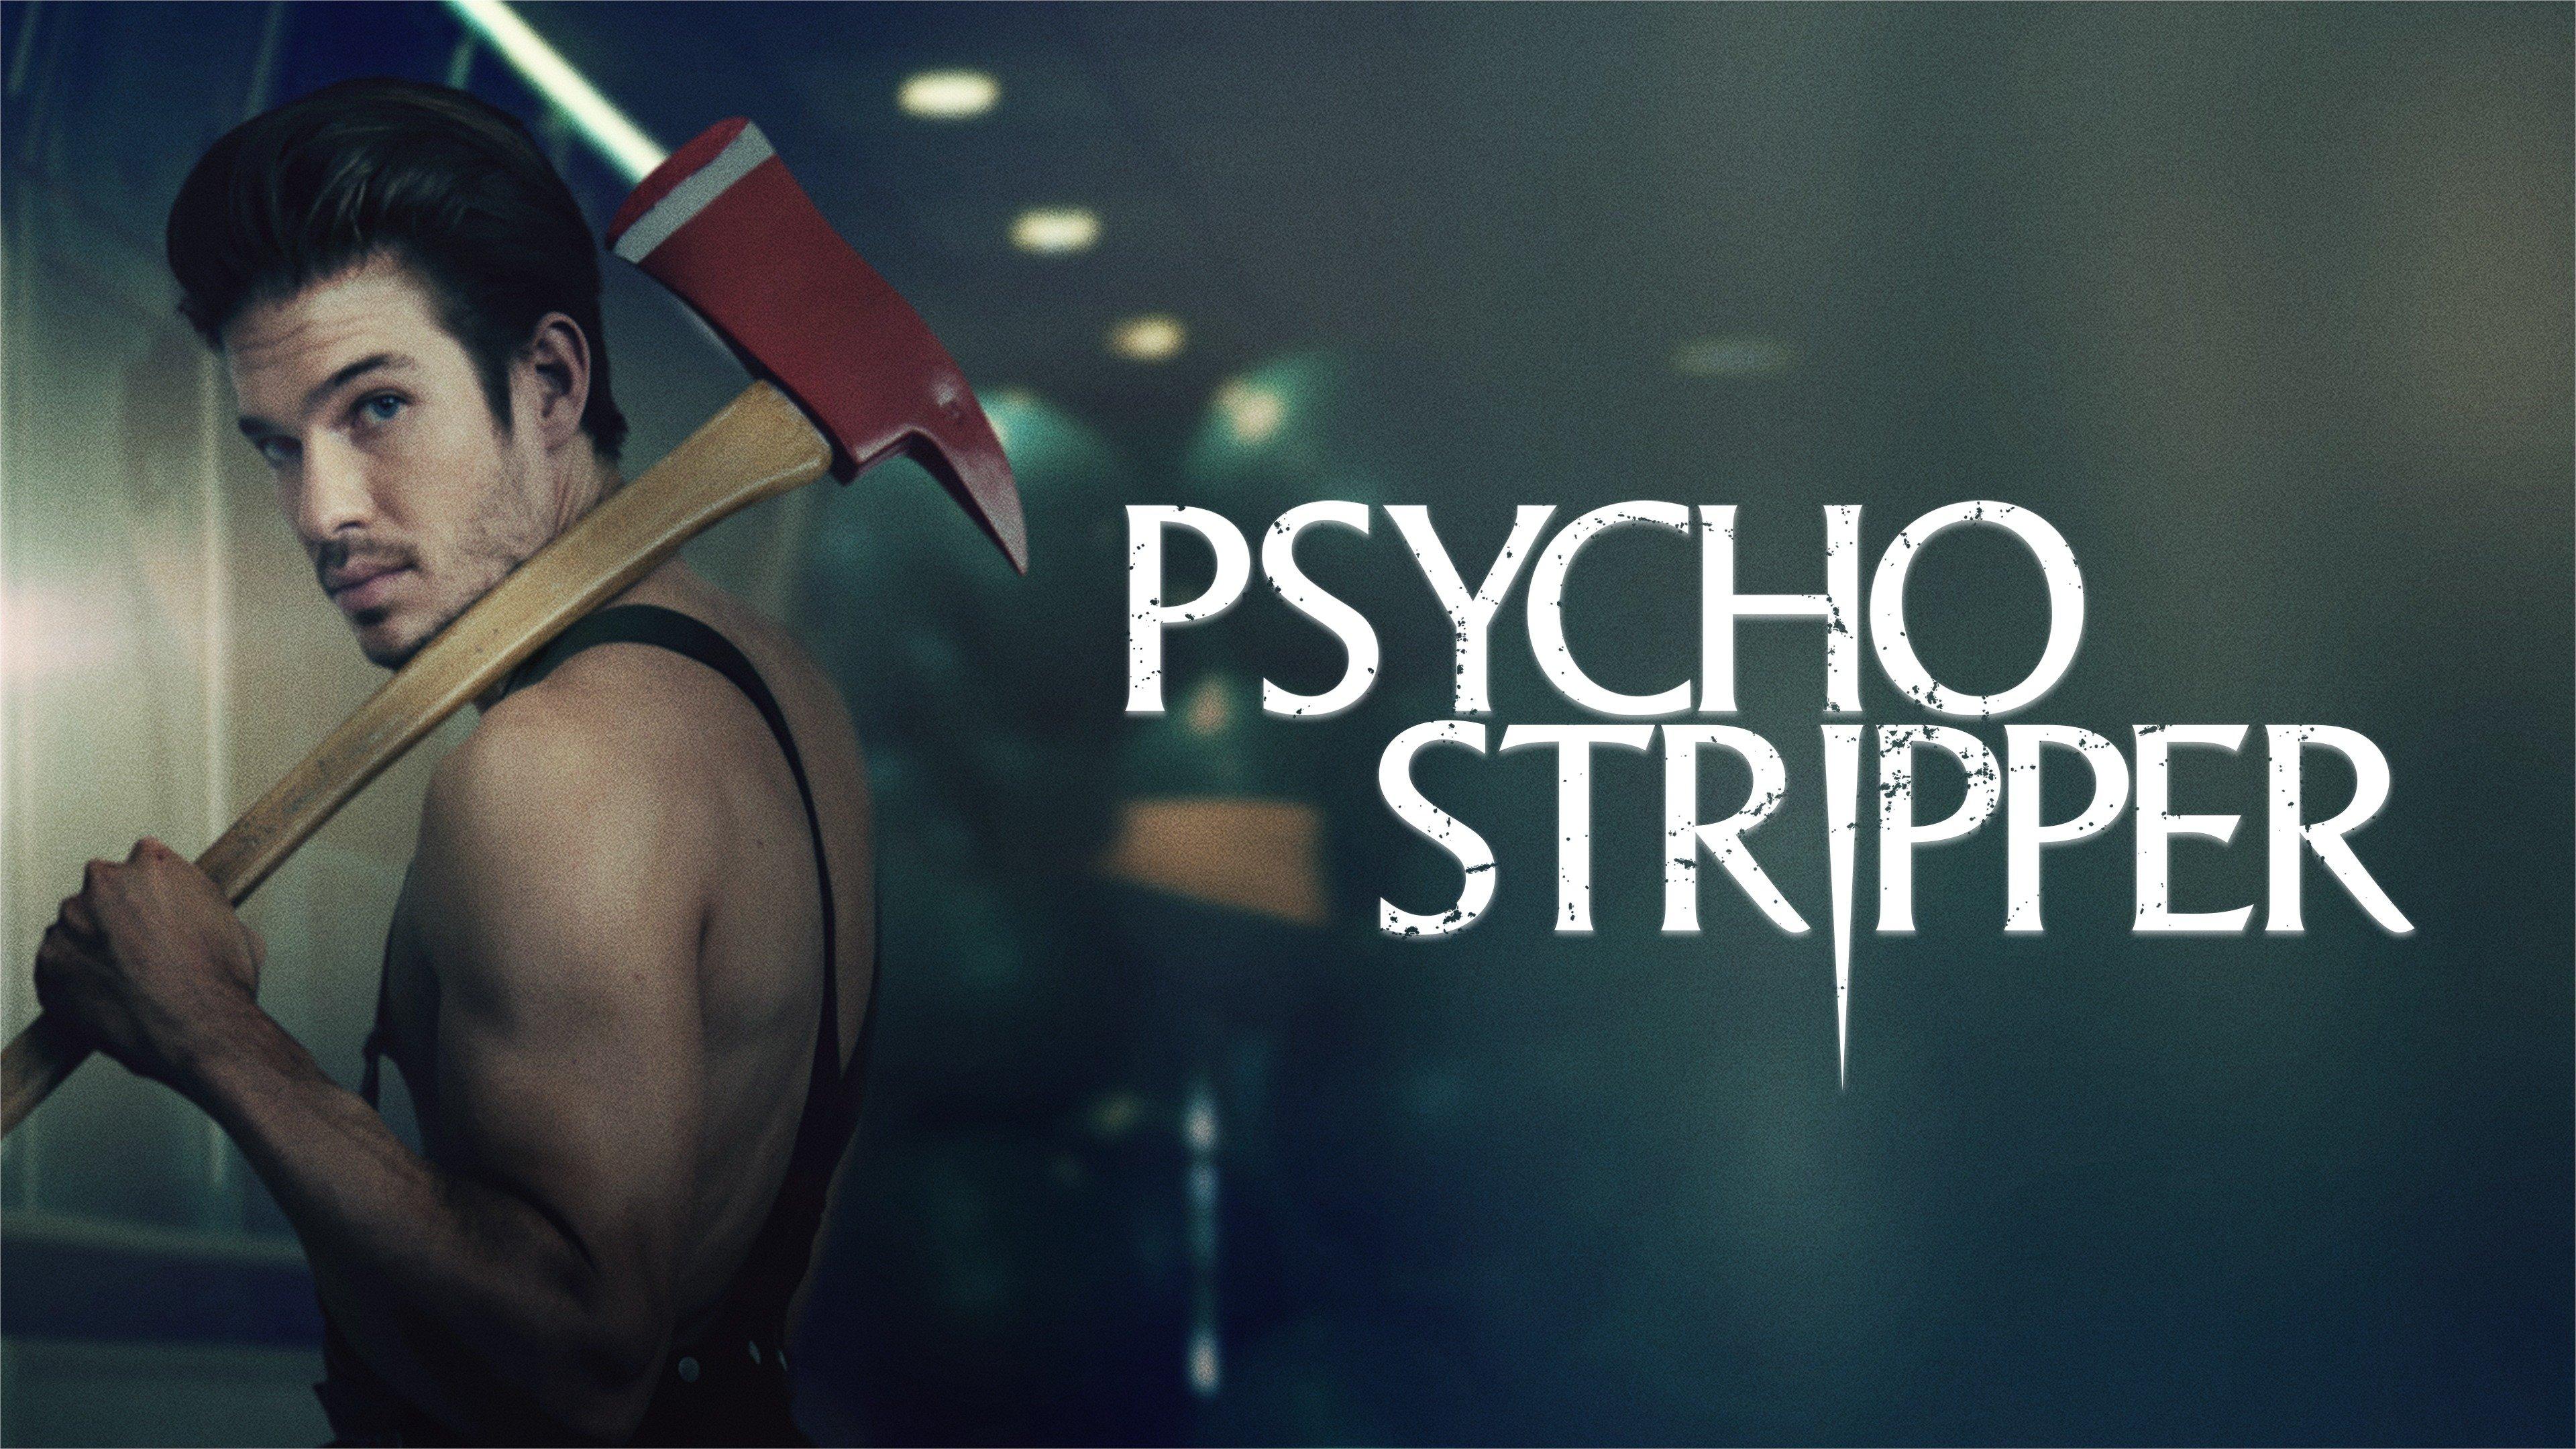 Watch Psycho Stripper Streaming Online On Philo Free Trial